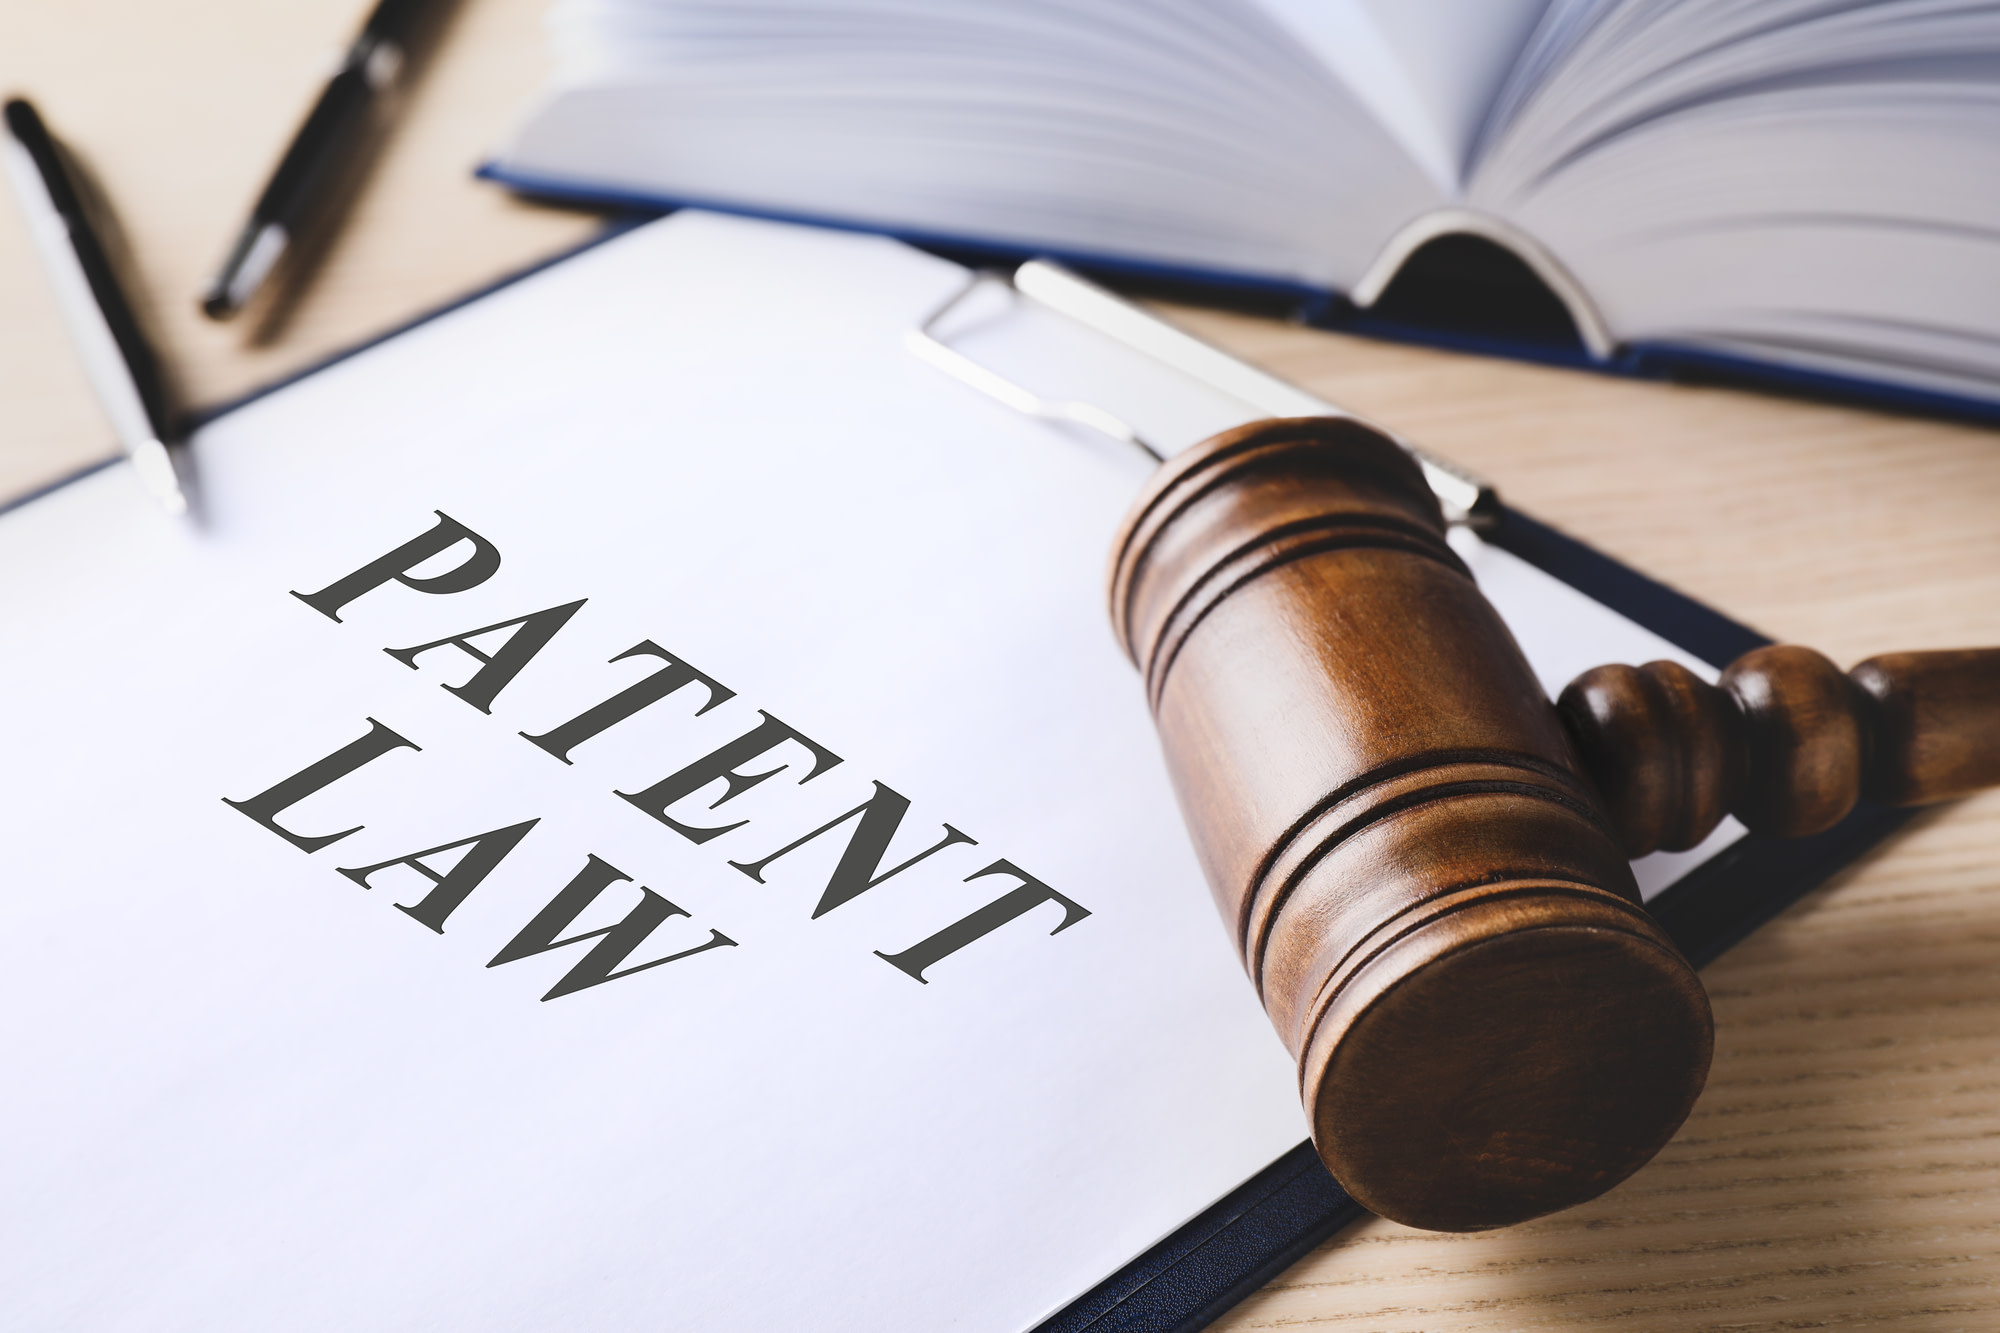 Patent law documents will help inventors